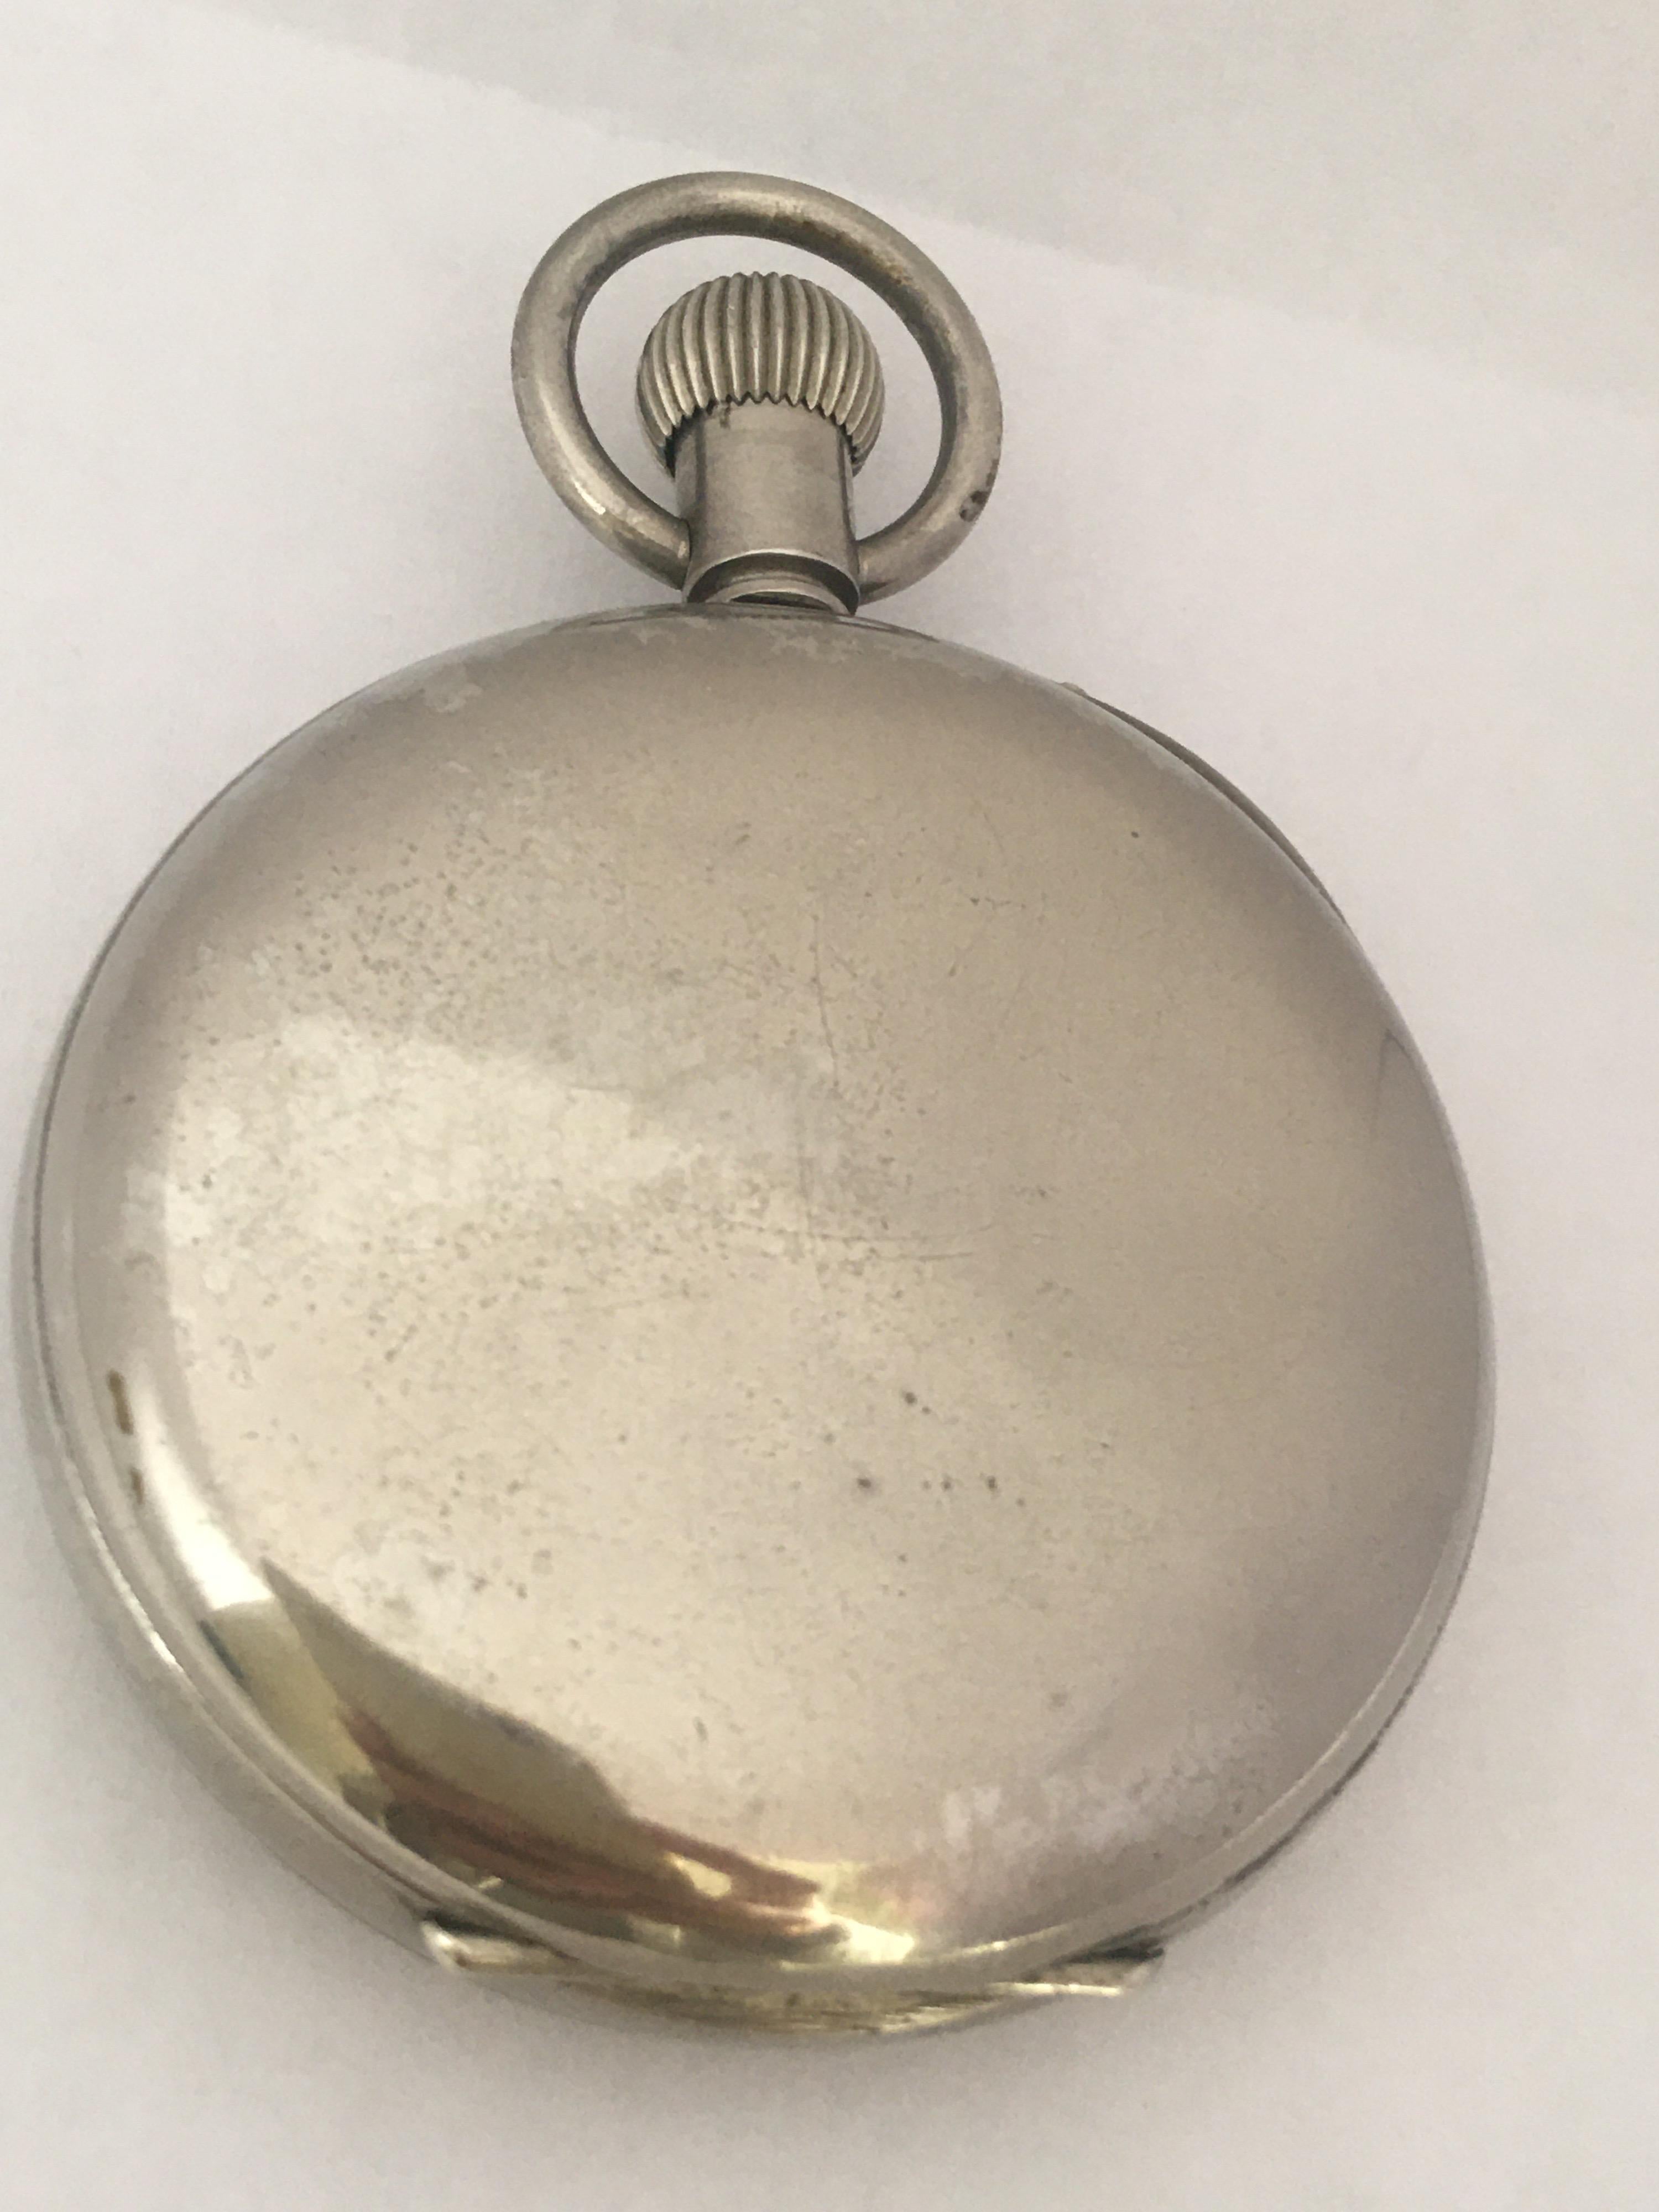 This beautiful heavy 59mm case diameter antique hand winding 8 day pocket watch is in good working condition and it is recently been serviced and runs well. Visible signs of ageing and wear with tiny and light scratches and tarnishes on the watch